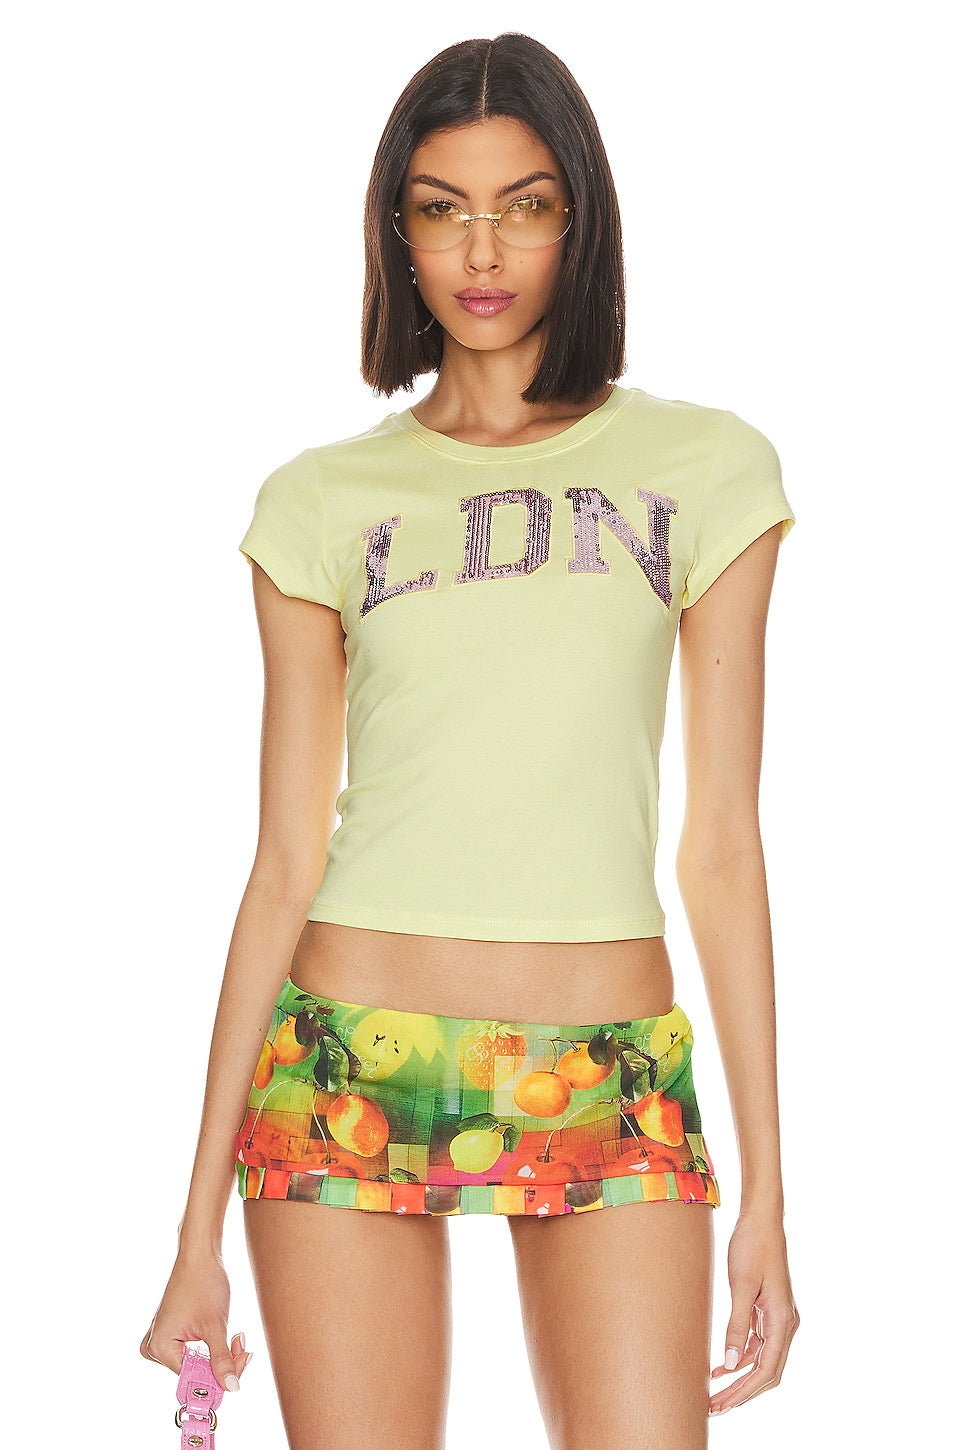 Jaded London Tink Baby Tee in Yellow Size US 6